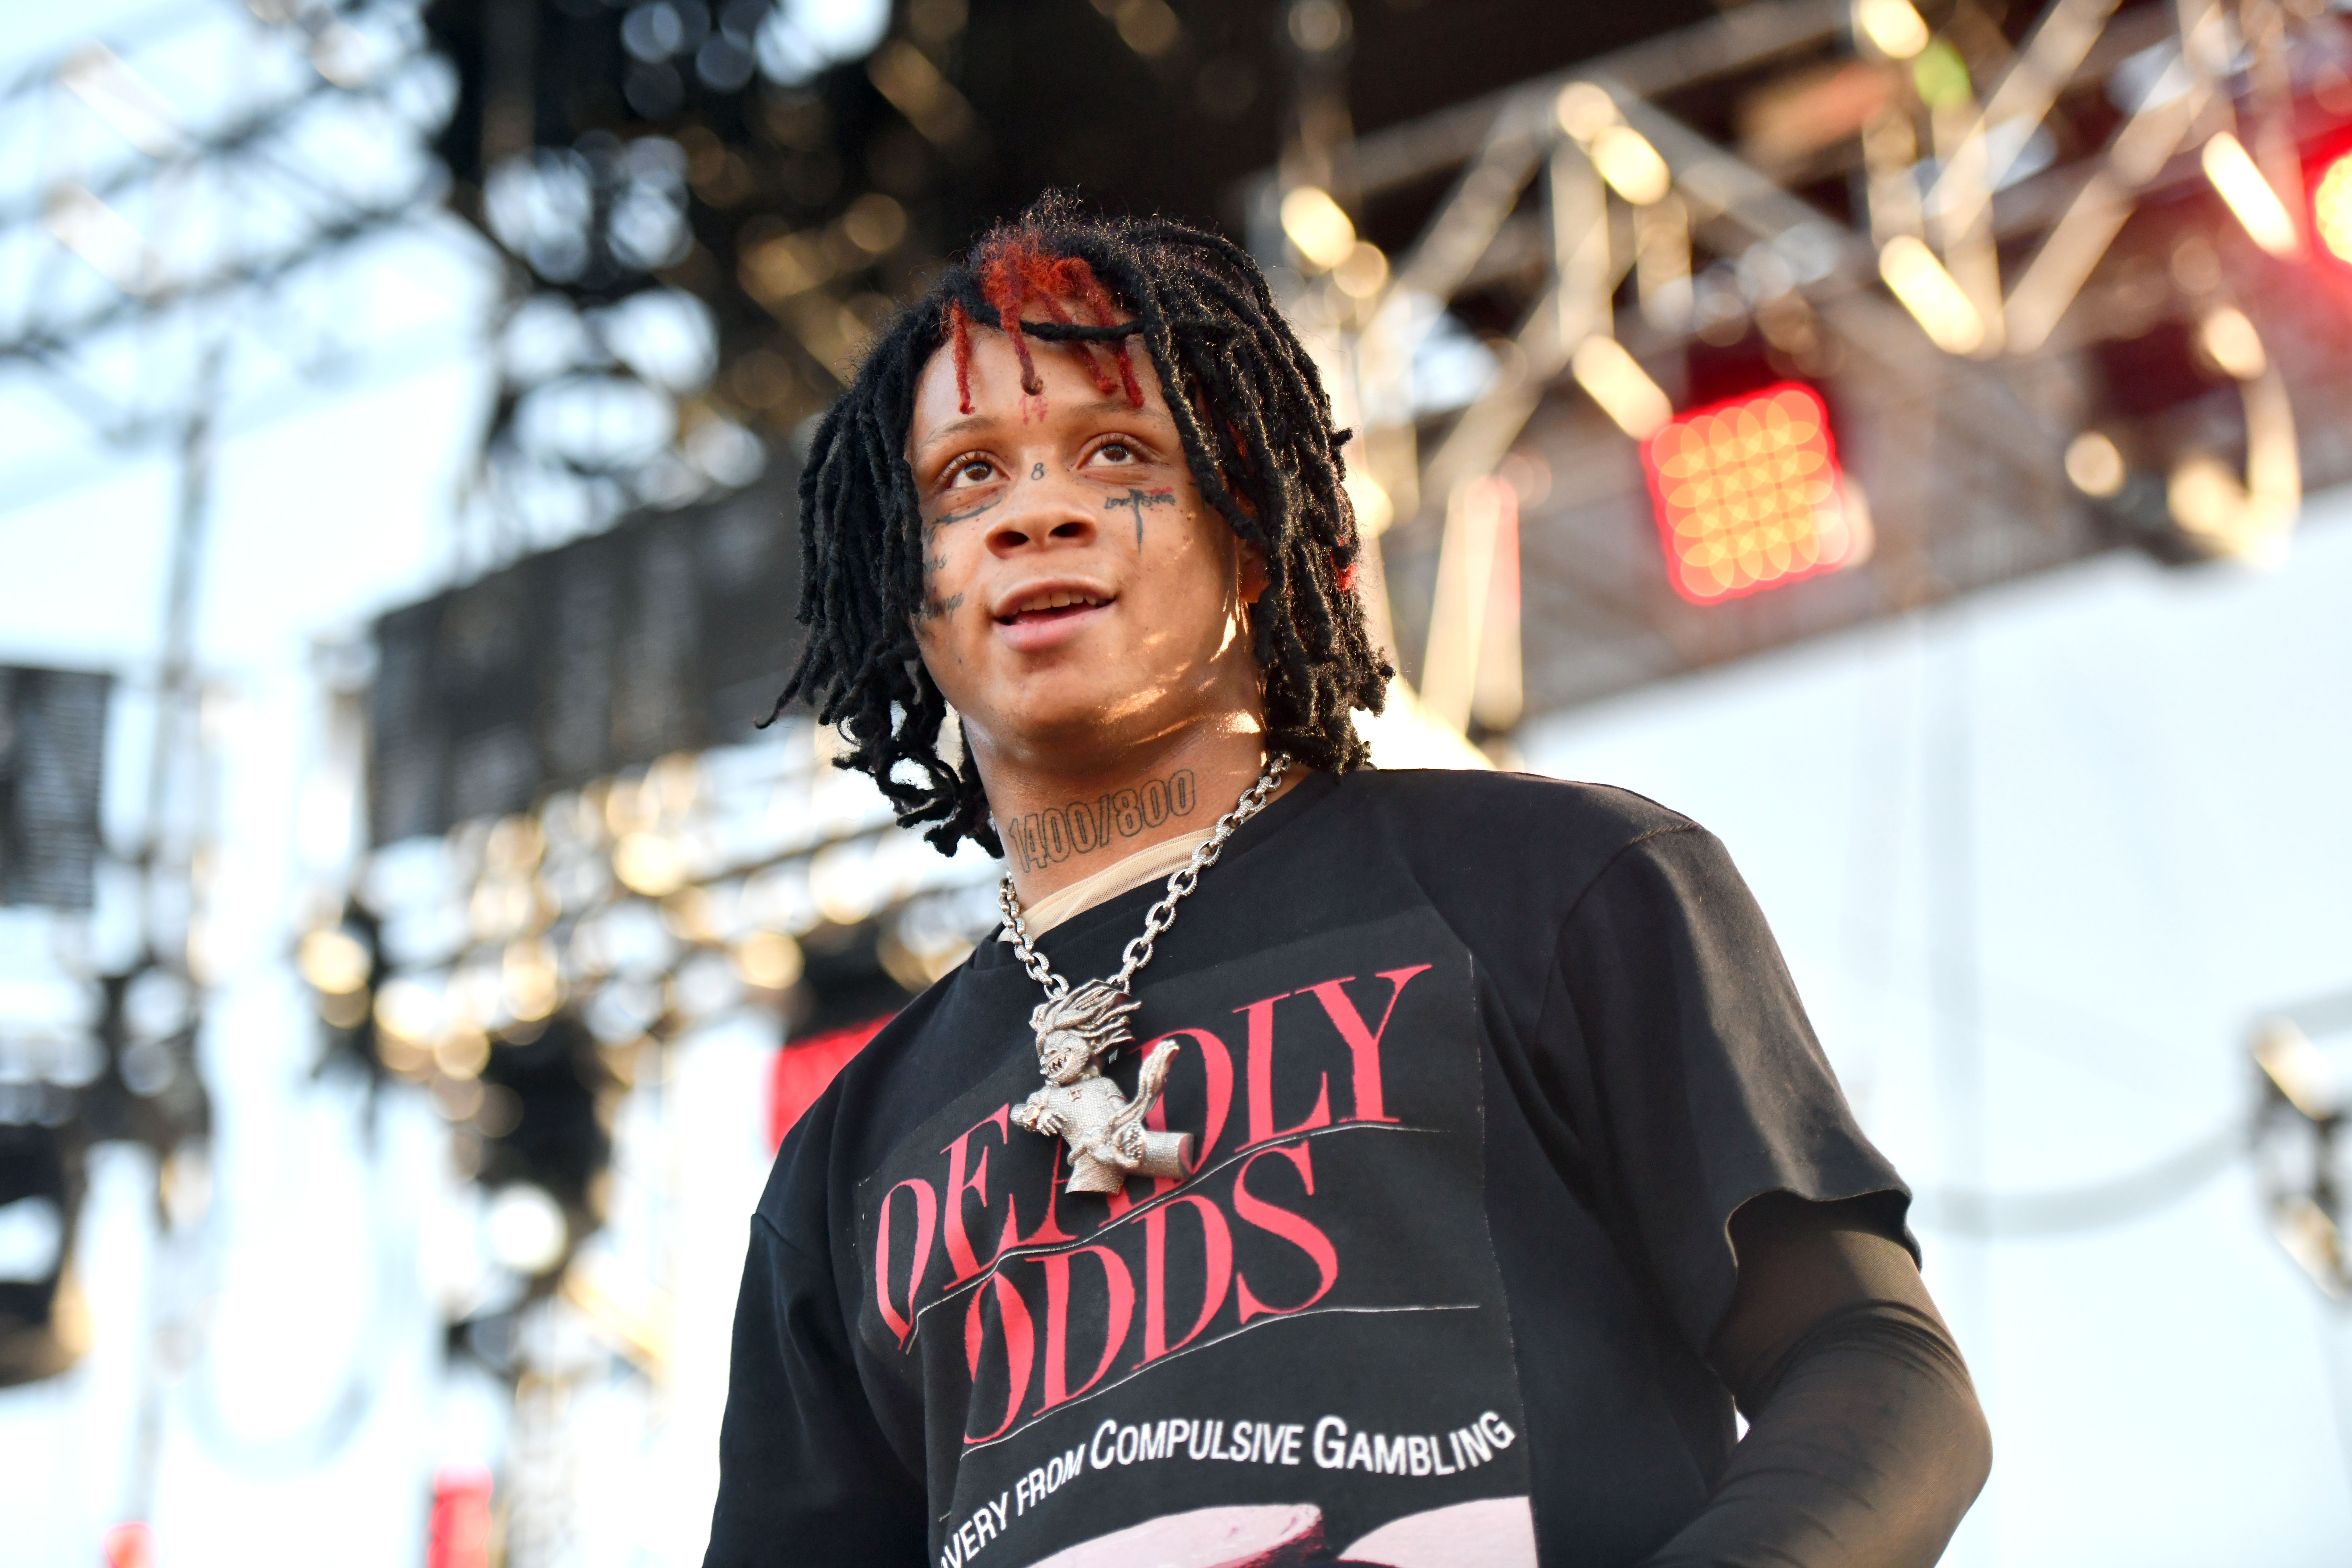 Trippie Redd’s Net Worth Is Widely Disputed, but the Rapper's Work Ethic Never Wavers